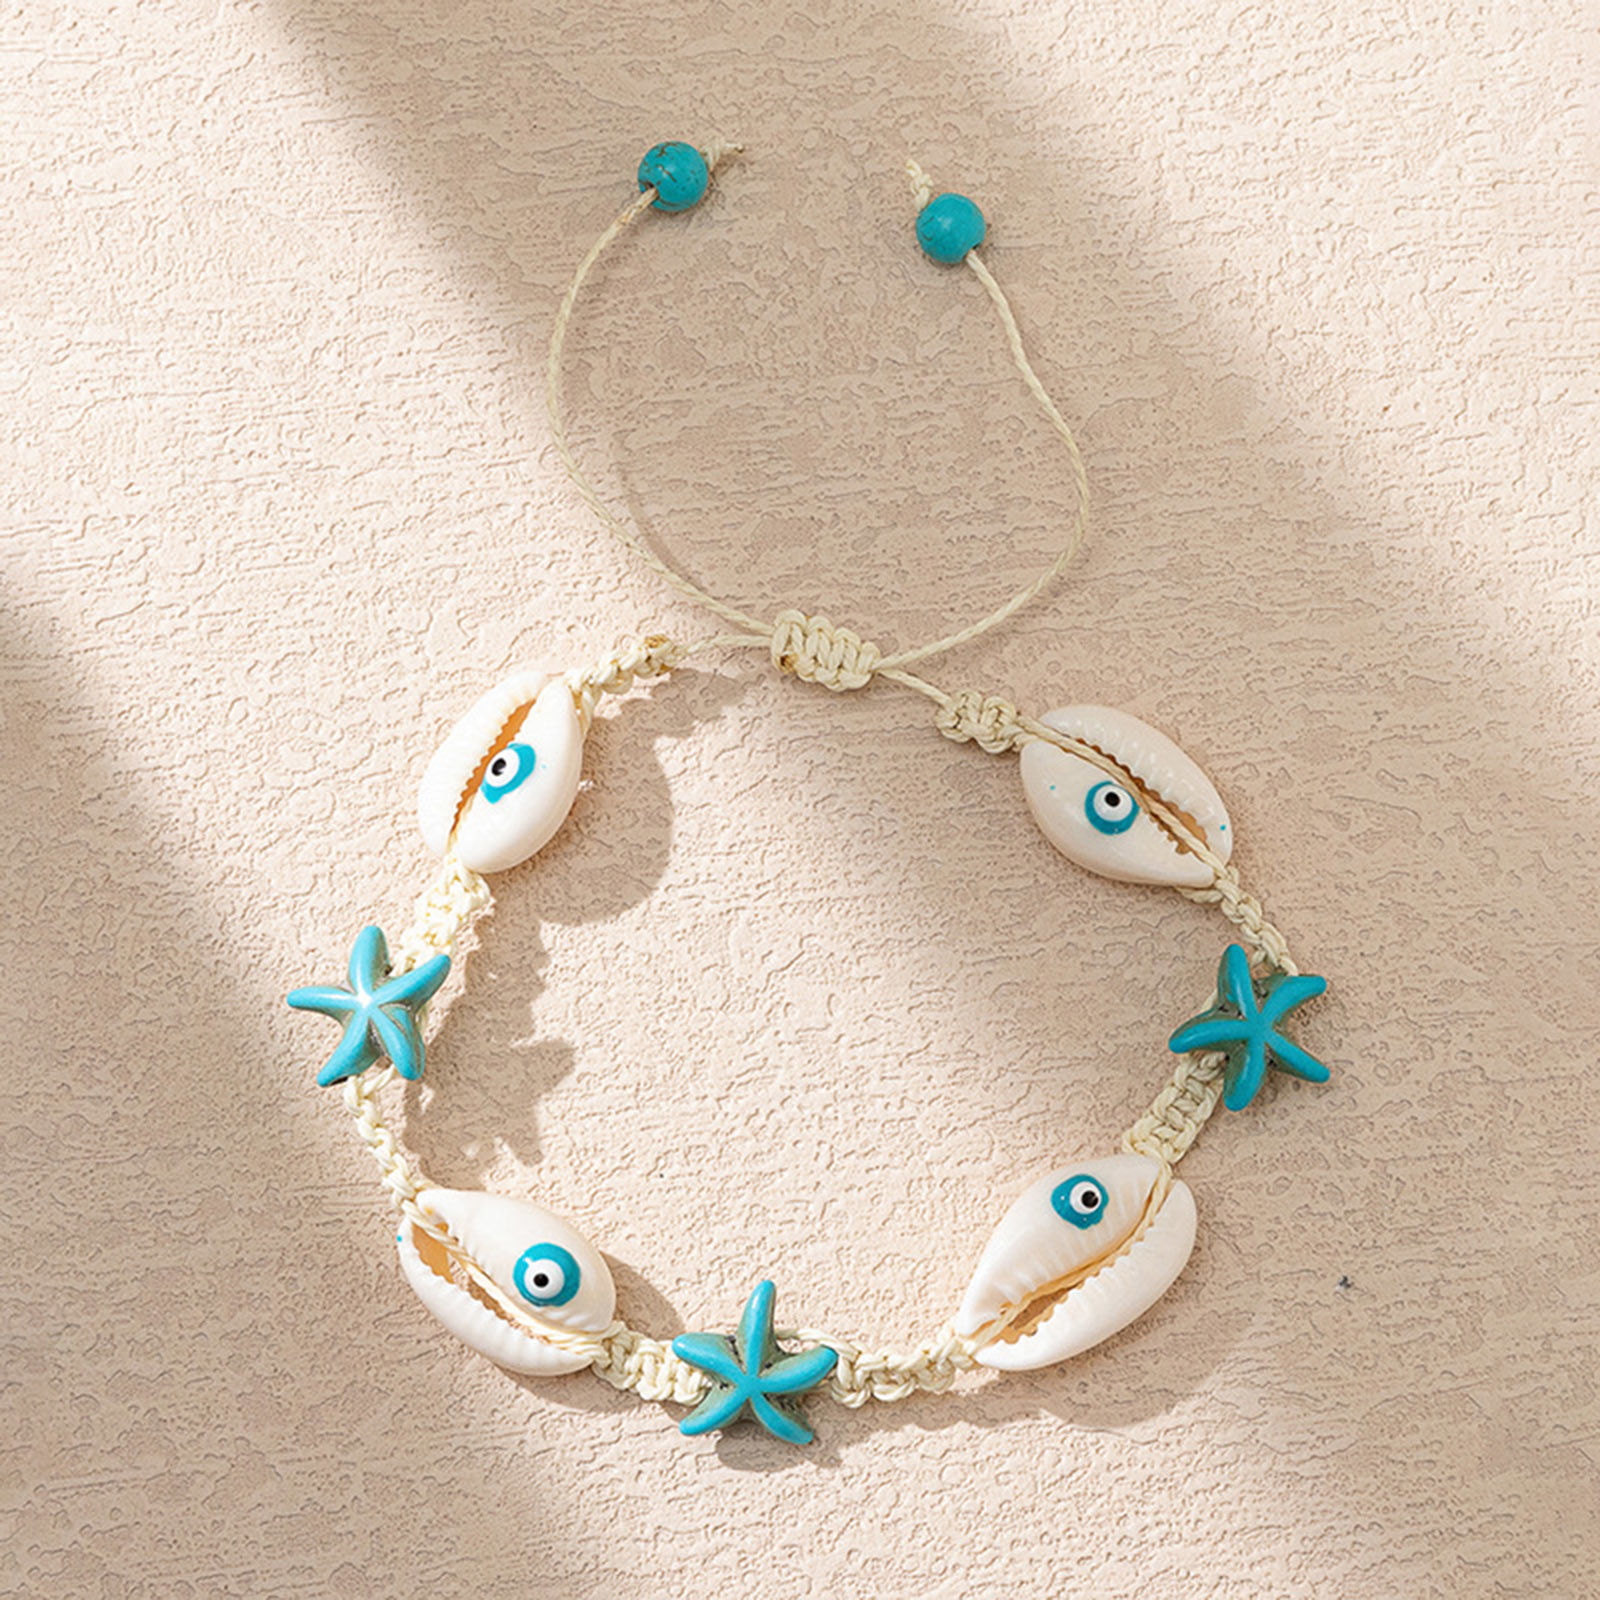 Picture of Shell Ocean Jewelry Braided Bracelets White & Blue Star Fish 6cm - 8cm Dia., 1 Piece